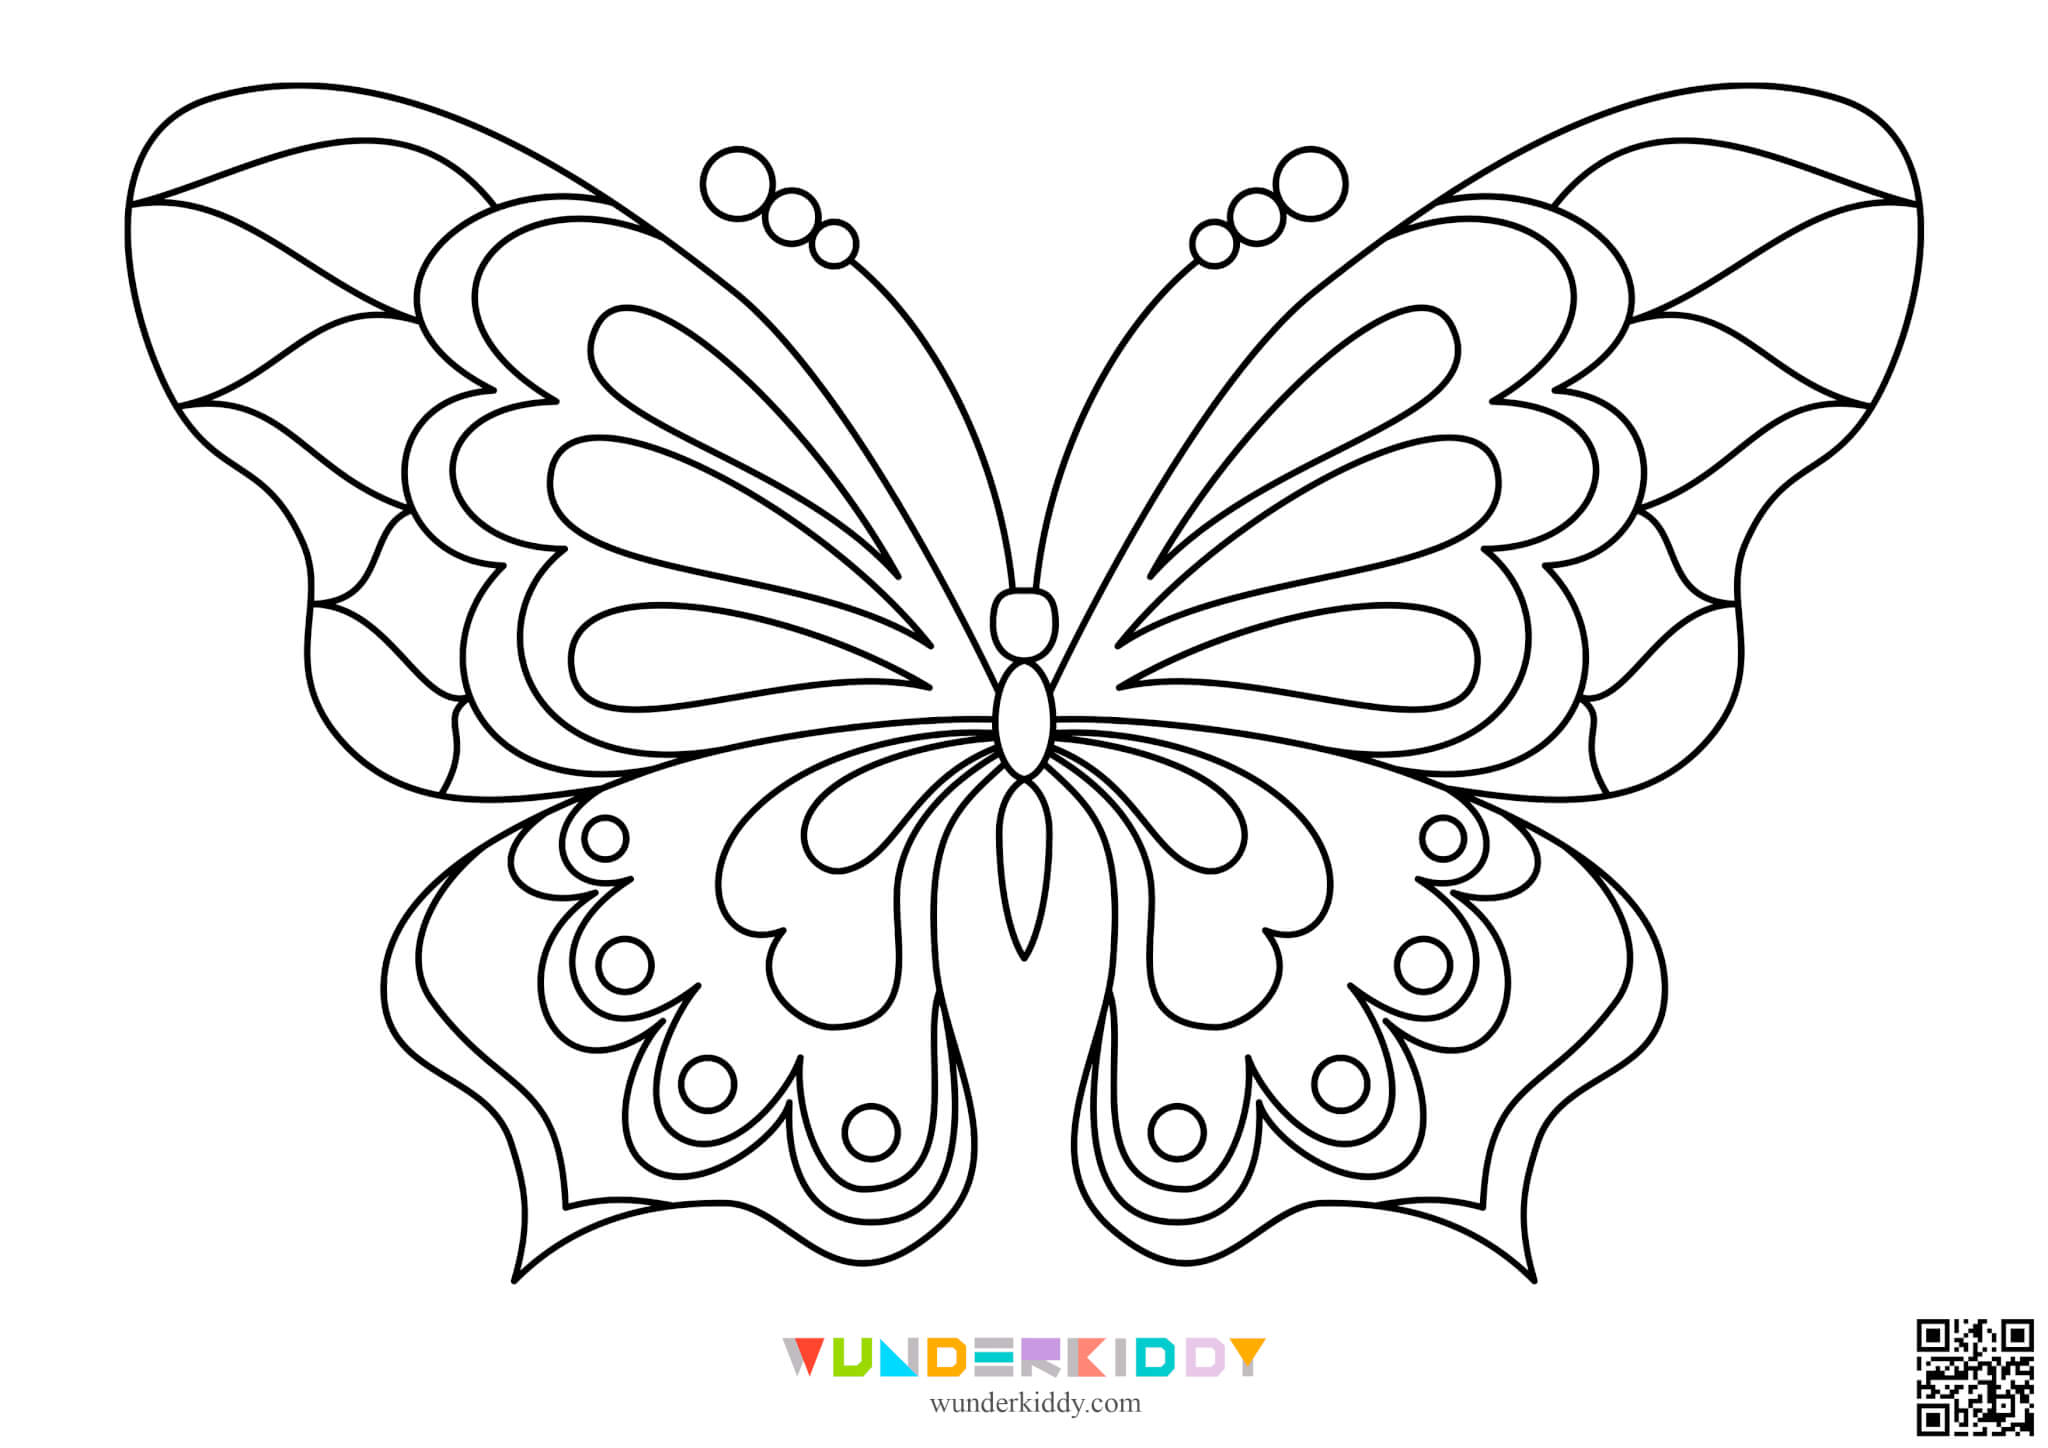 Butterfly Template Printable - Image 3